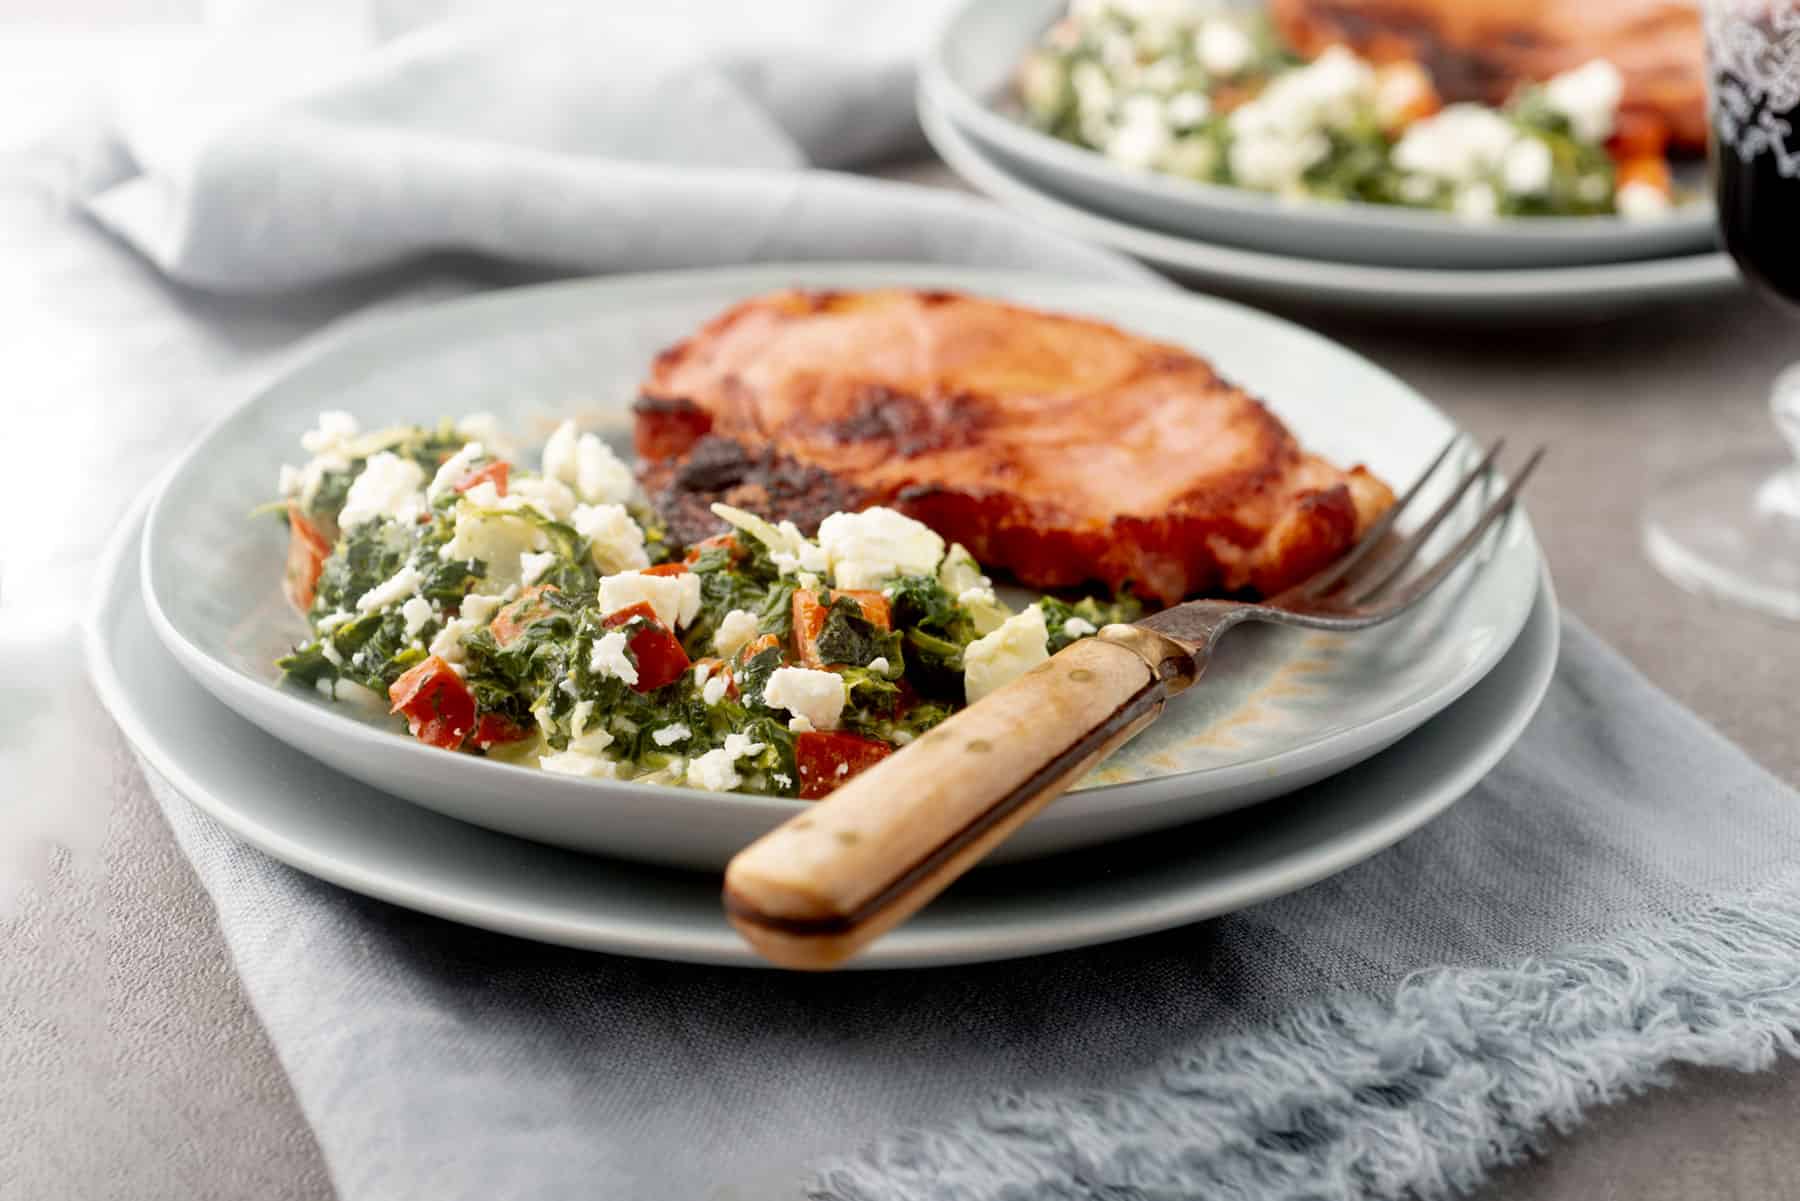 Pork chops with spinach side dish.